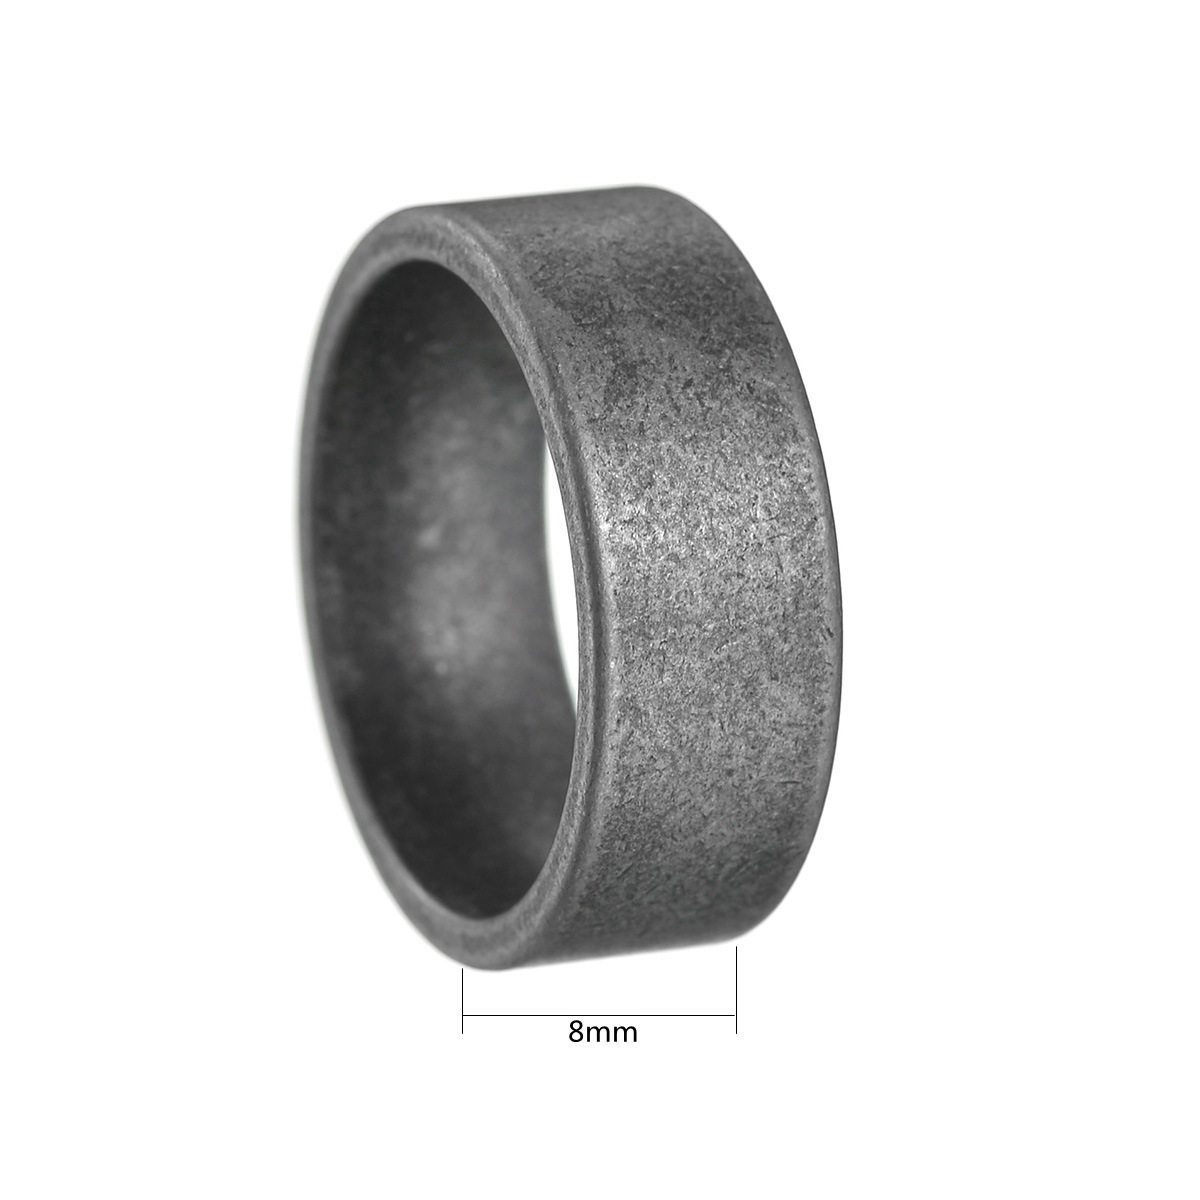 8mm antique silver finish 7